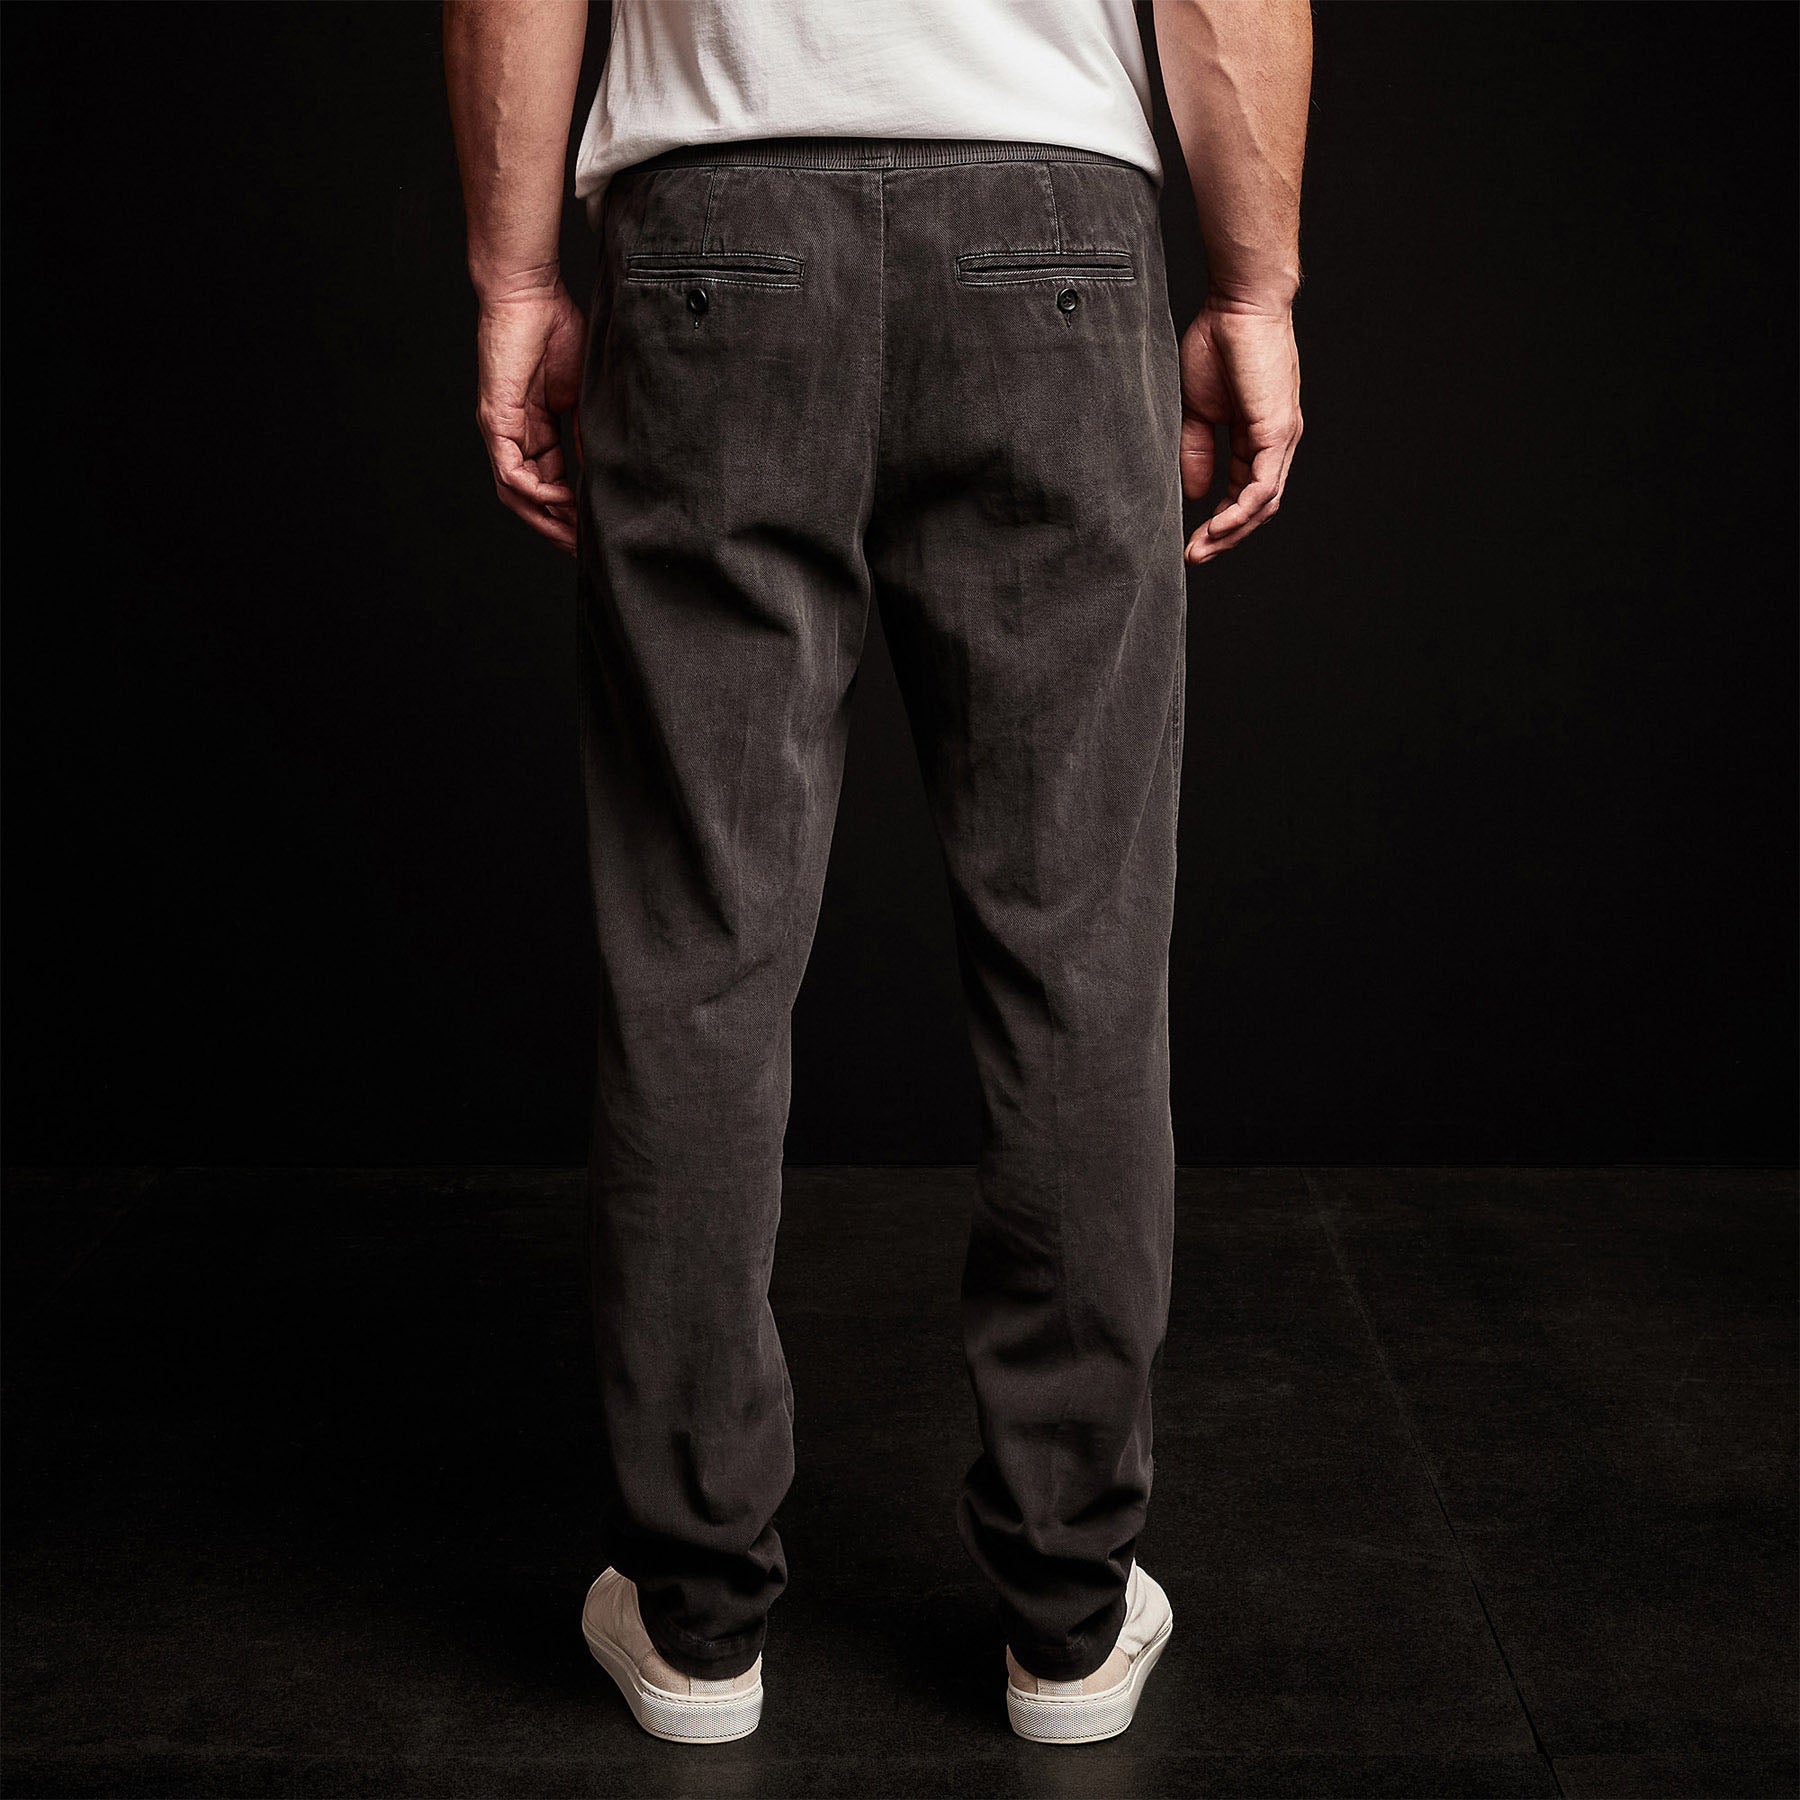 Brushed Cotton Twill Trouser - Dark Olive Pigment | James Perse